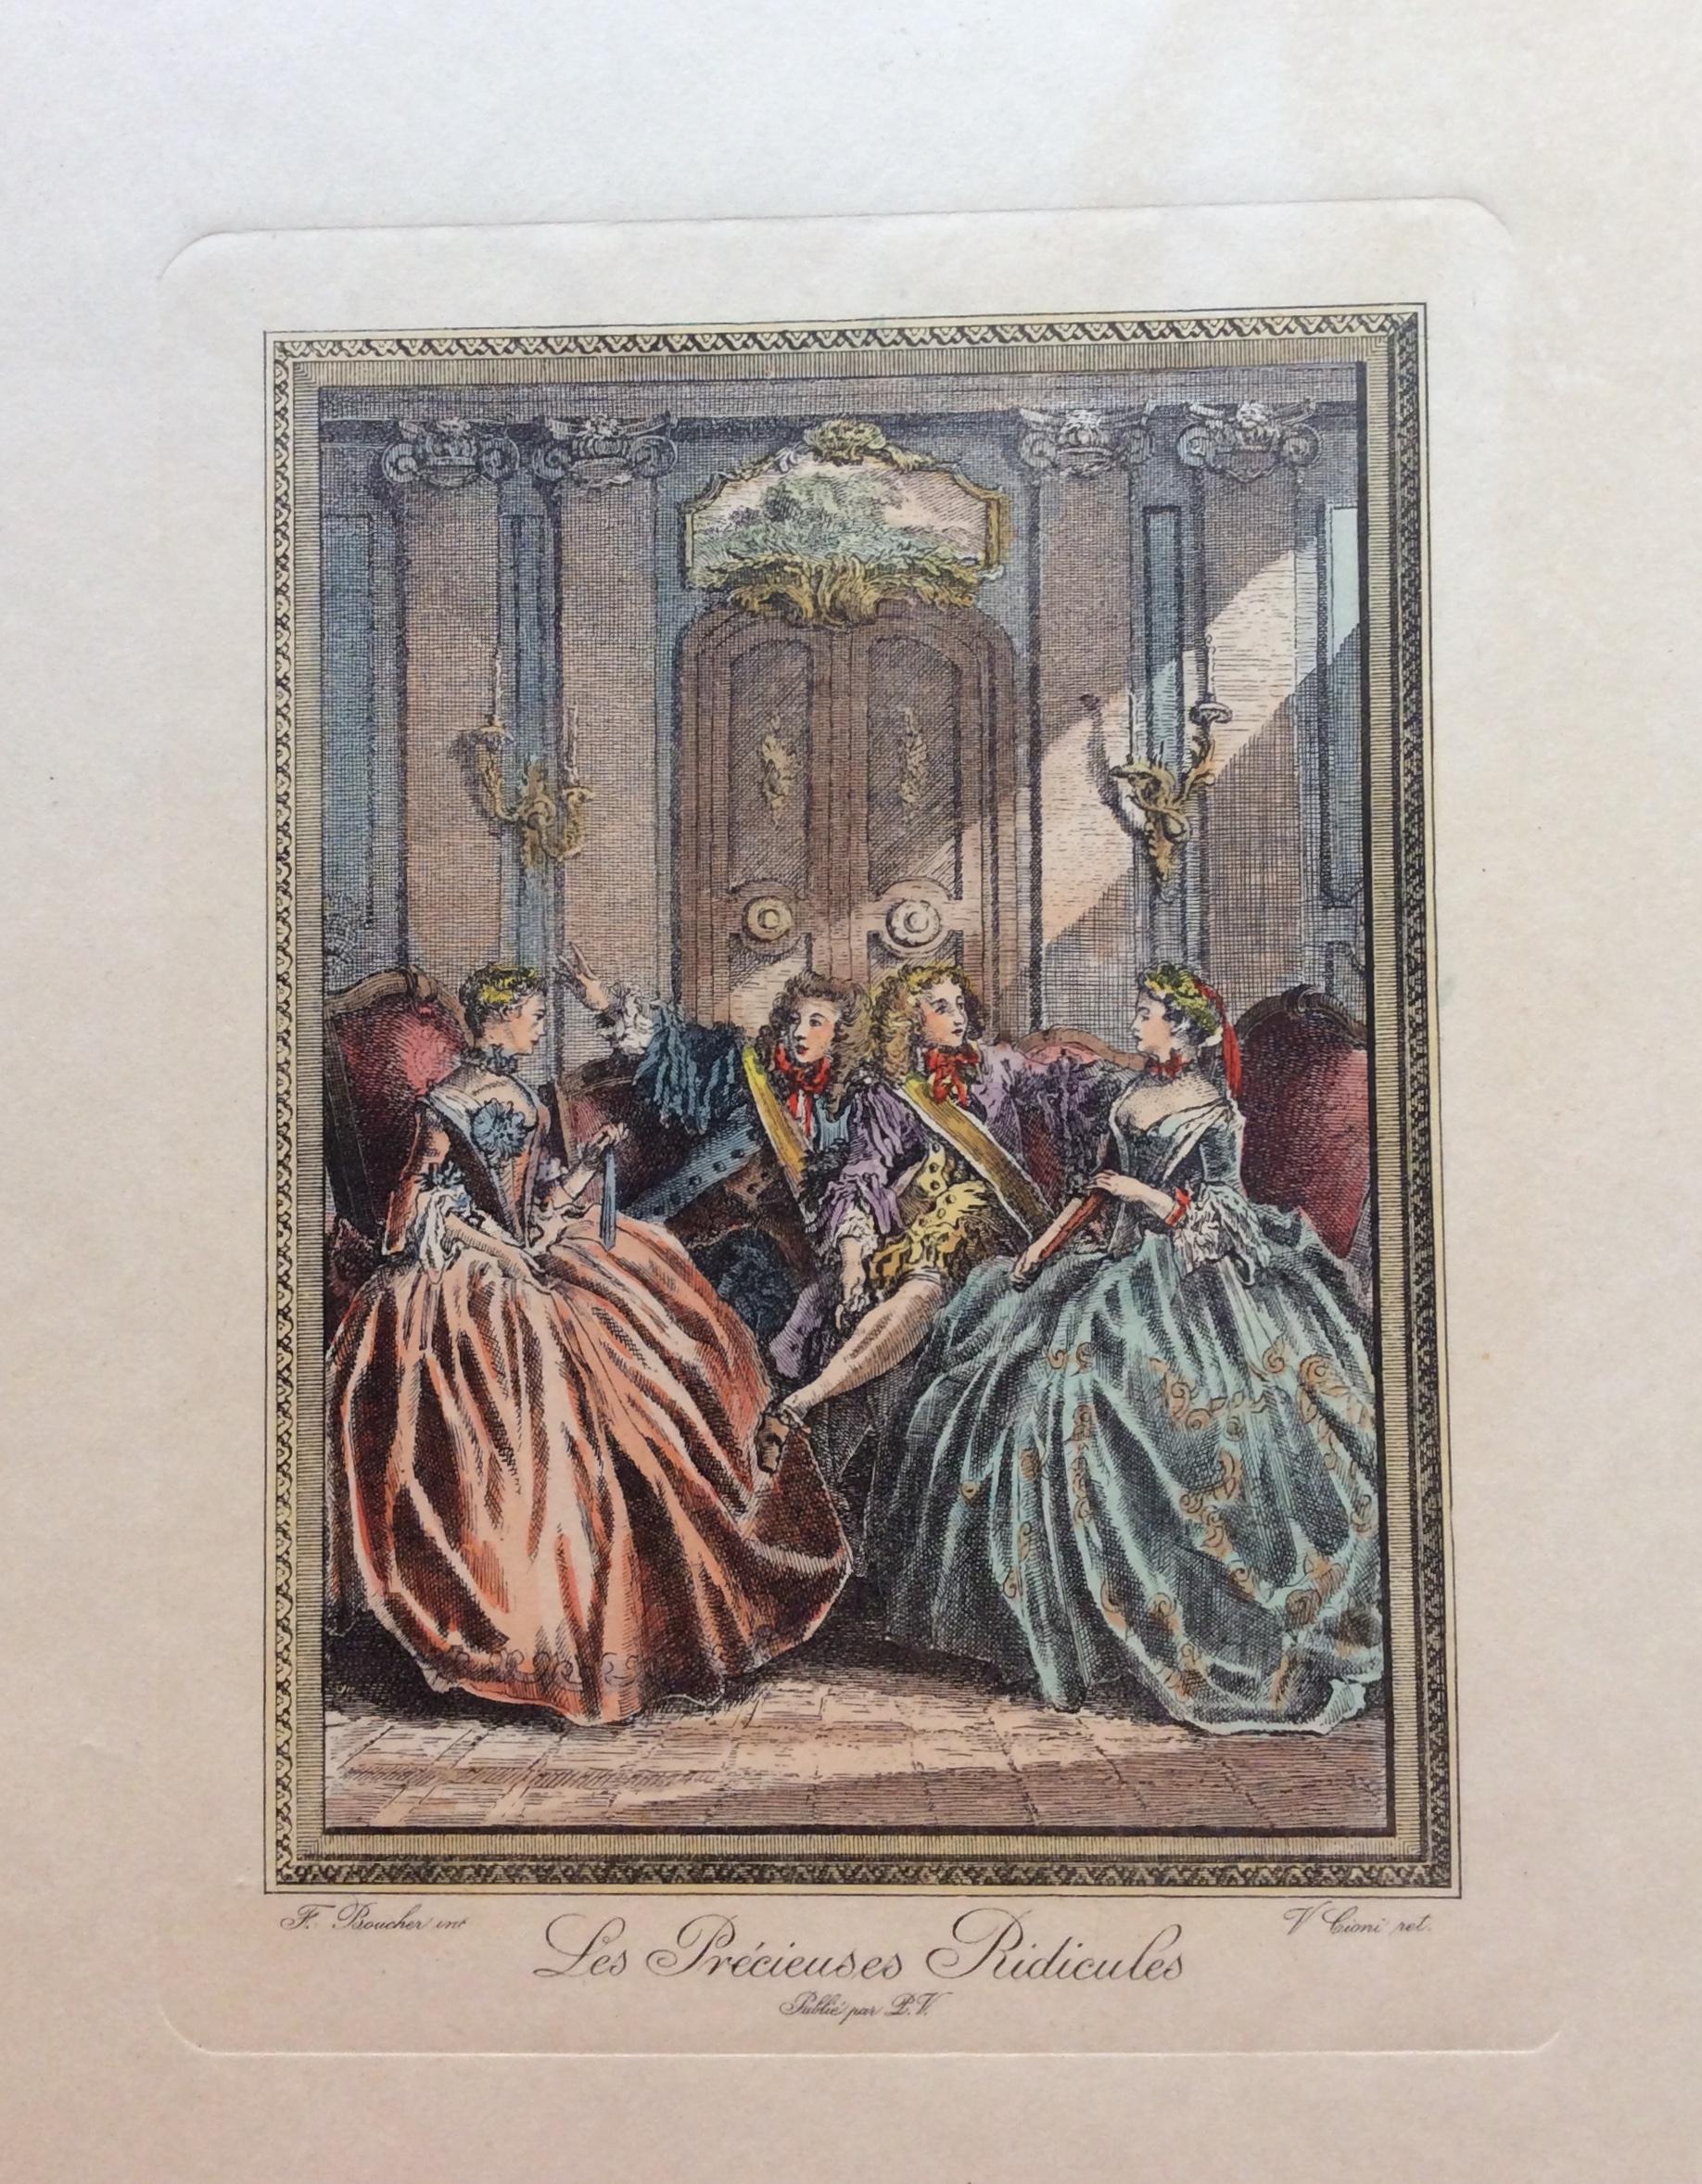 Antique engraving prints - make a great gift!

Fine crisp impressions of great rarity; it is particularly unusual to find a set of this quality and condition in today’s print market.

Rare set of seven engraving prints by famed artist François